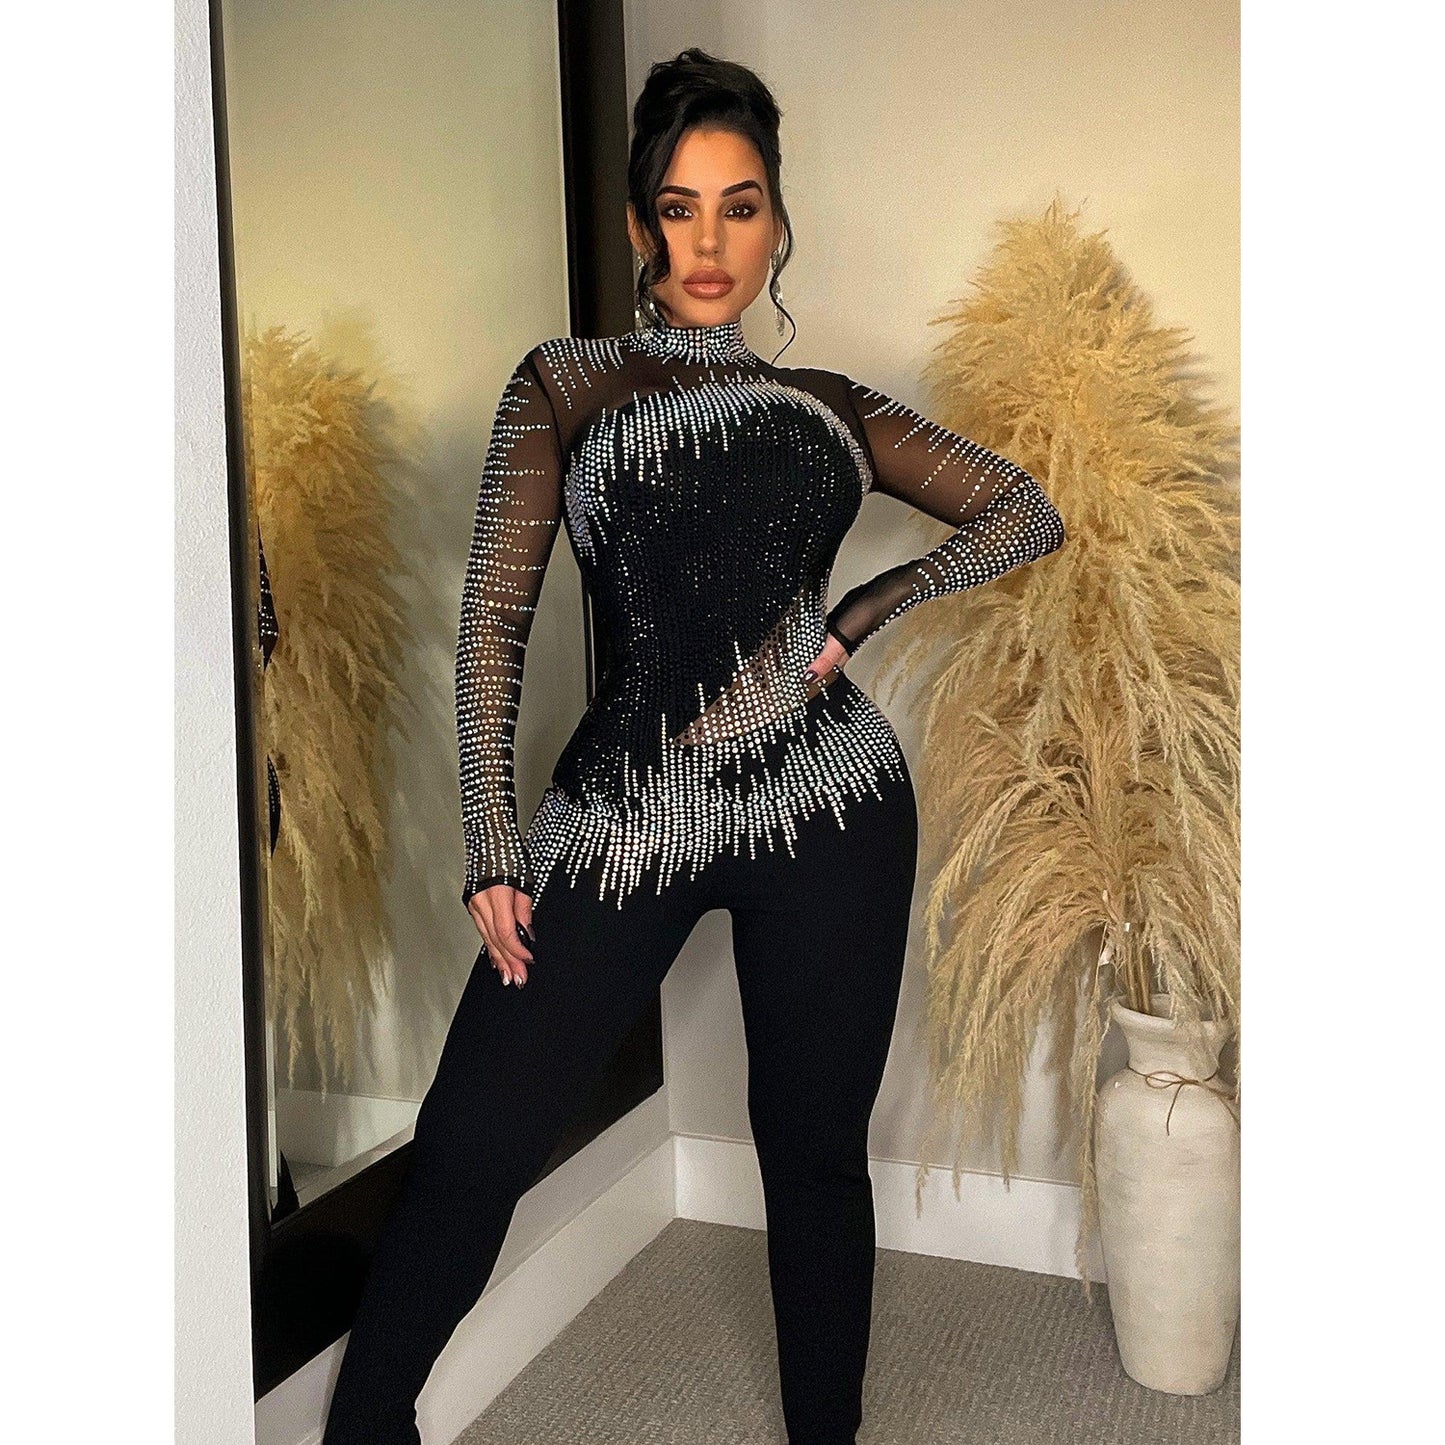 Women's Pure Color Mesh Rhinestone Long-sleeved Trousers Jumpsuit